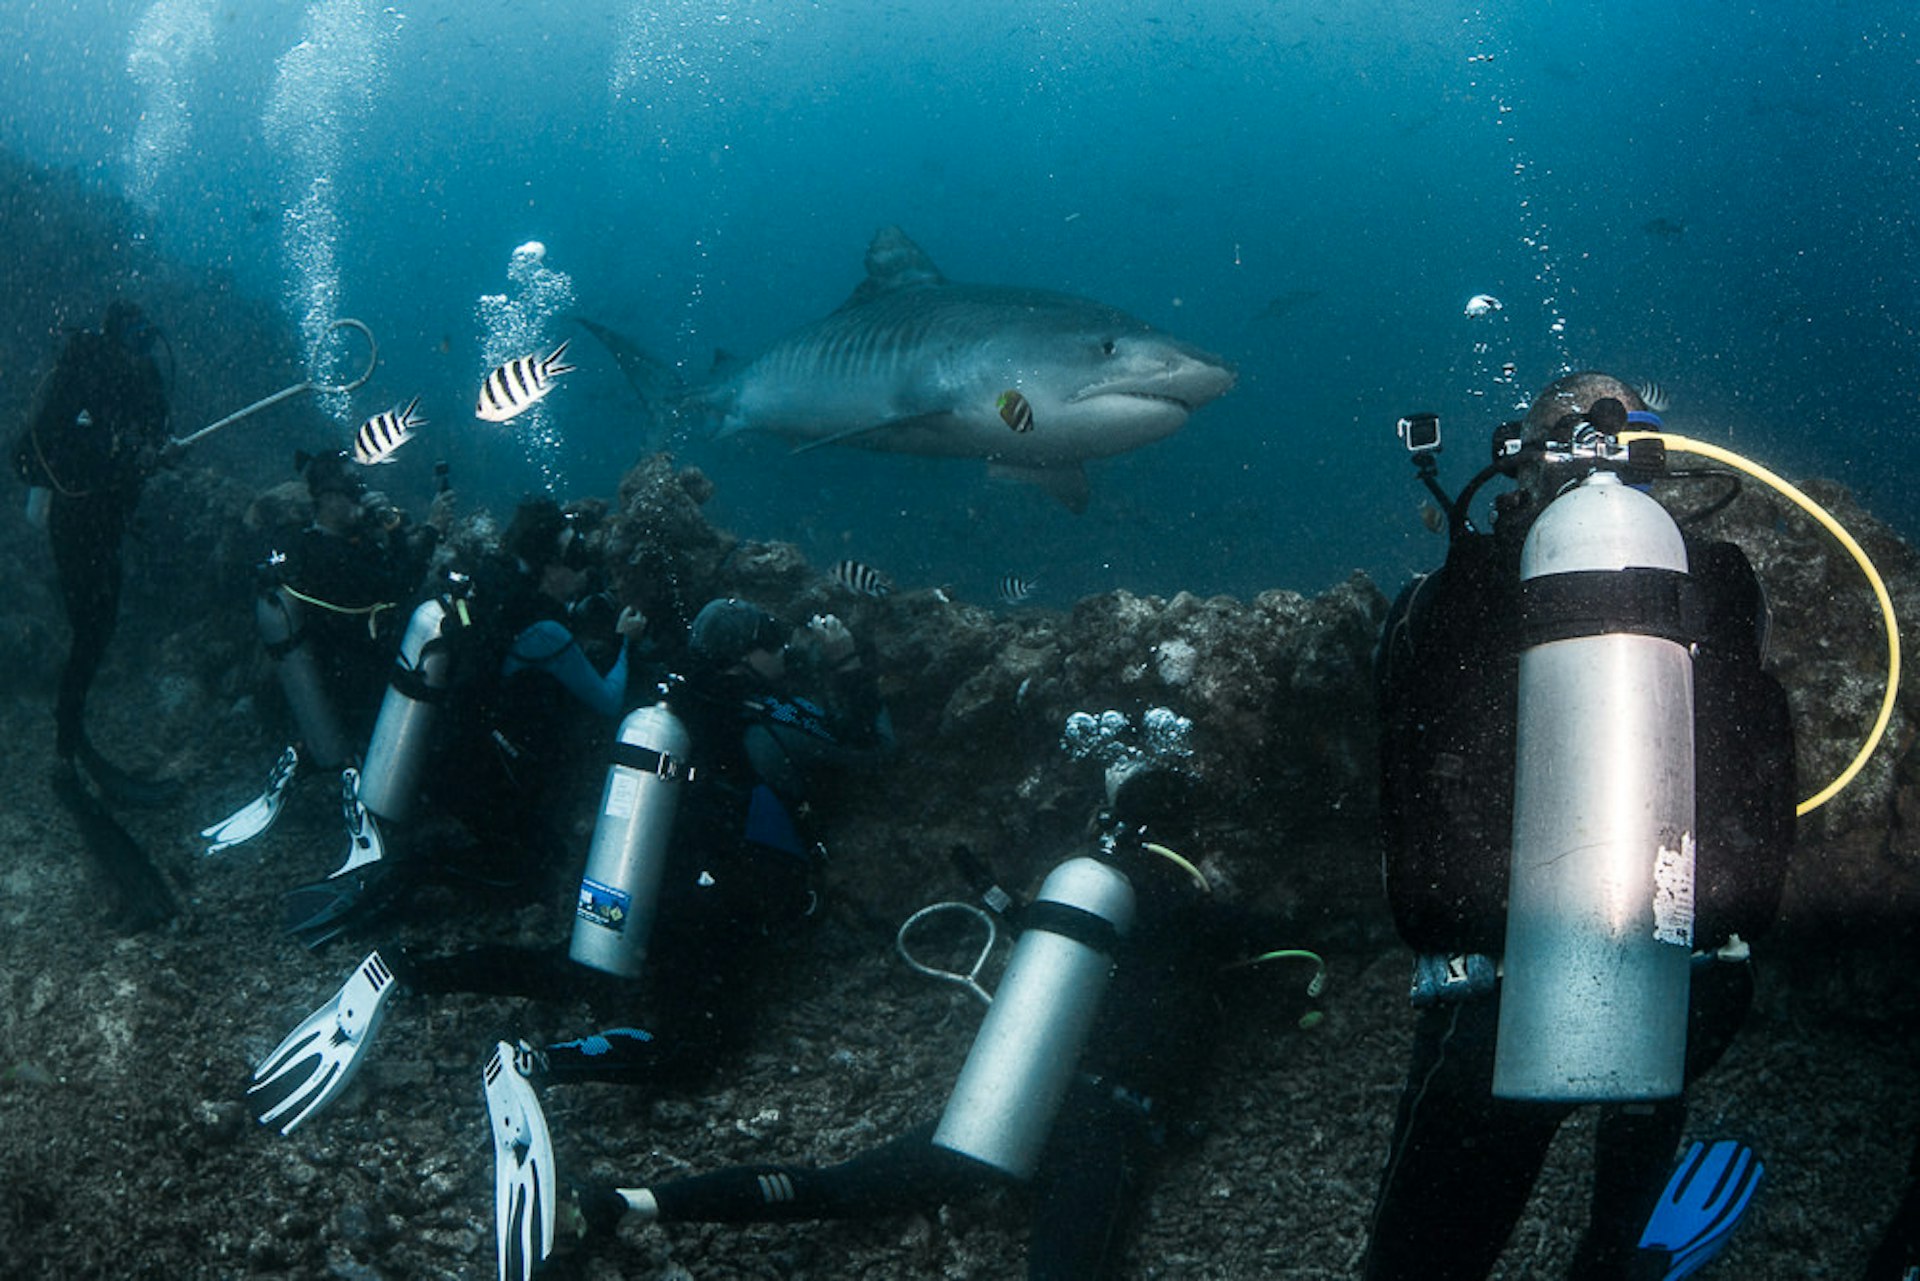 Divers cling to a rock wall while a large shark passes on the other side